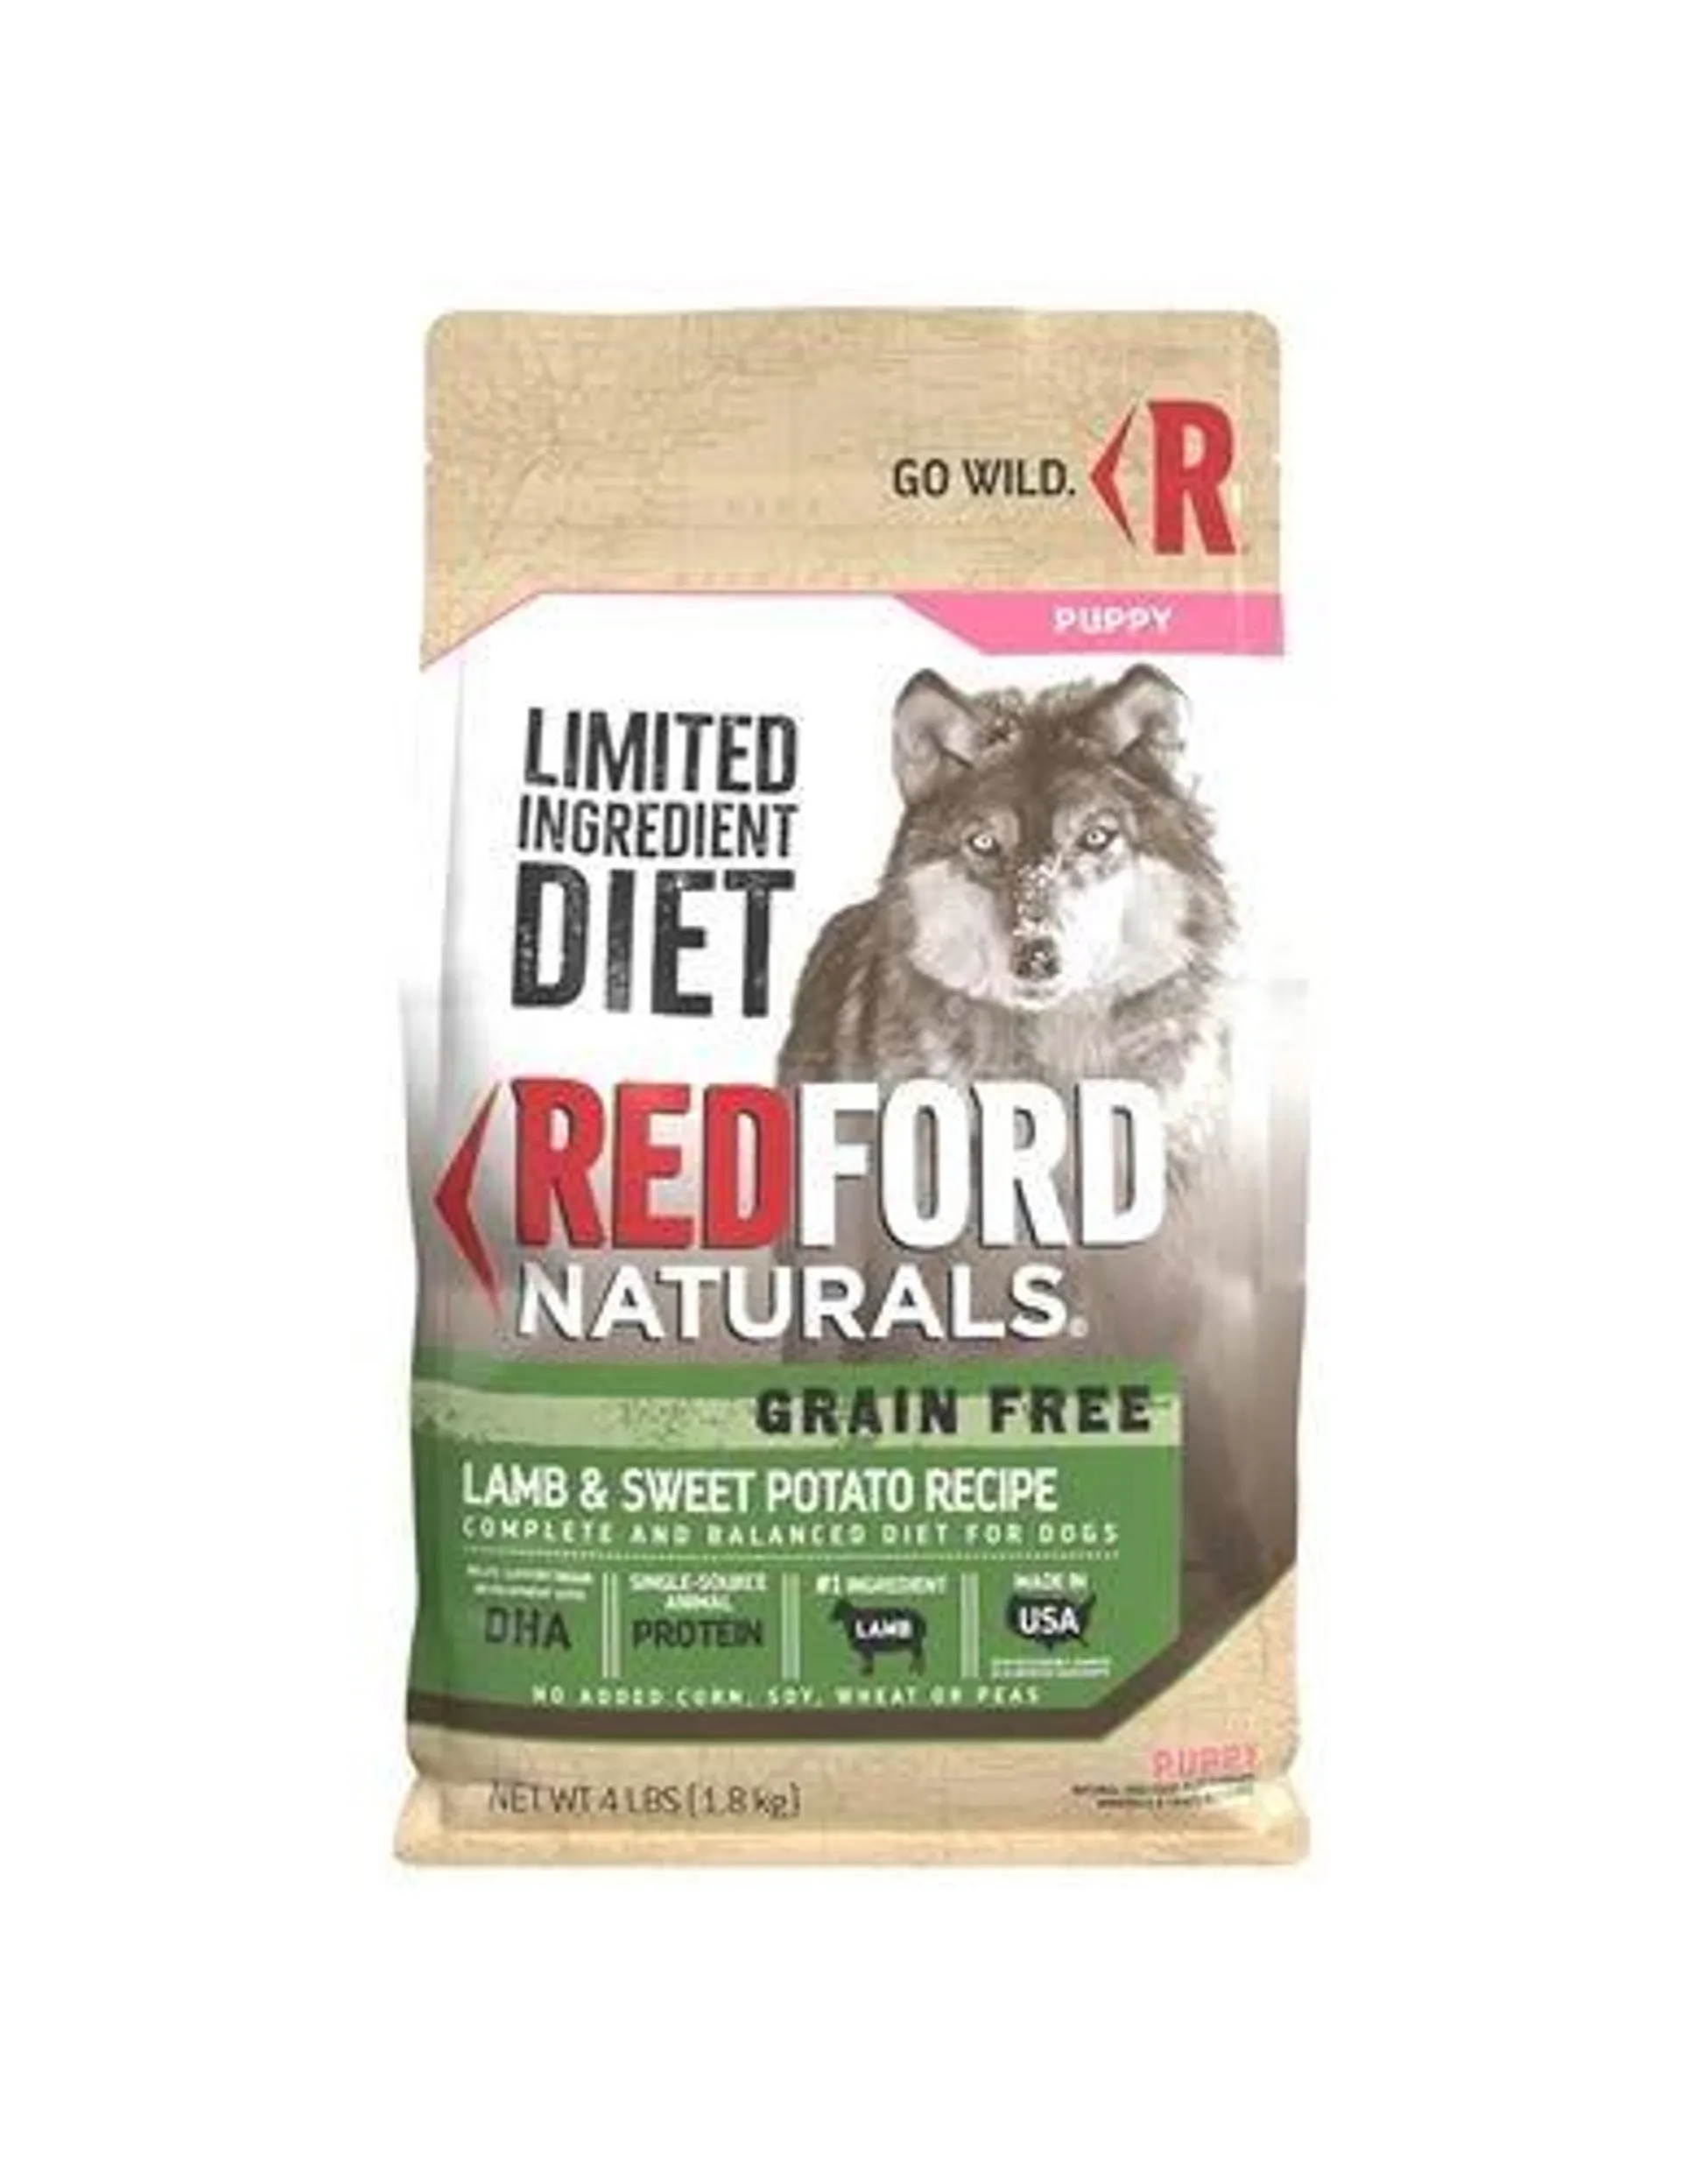 Redford Naturals Limited Ingredient Diet Grain Free Puppy Lamb & Sweet Potato Recipe Dog Food, 4 Pounds